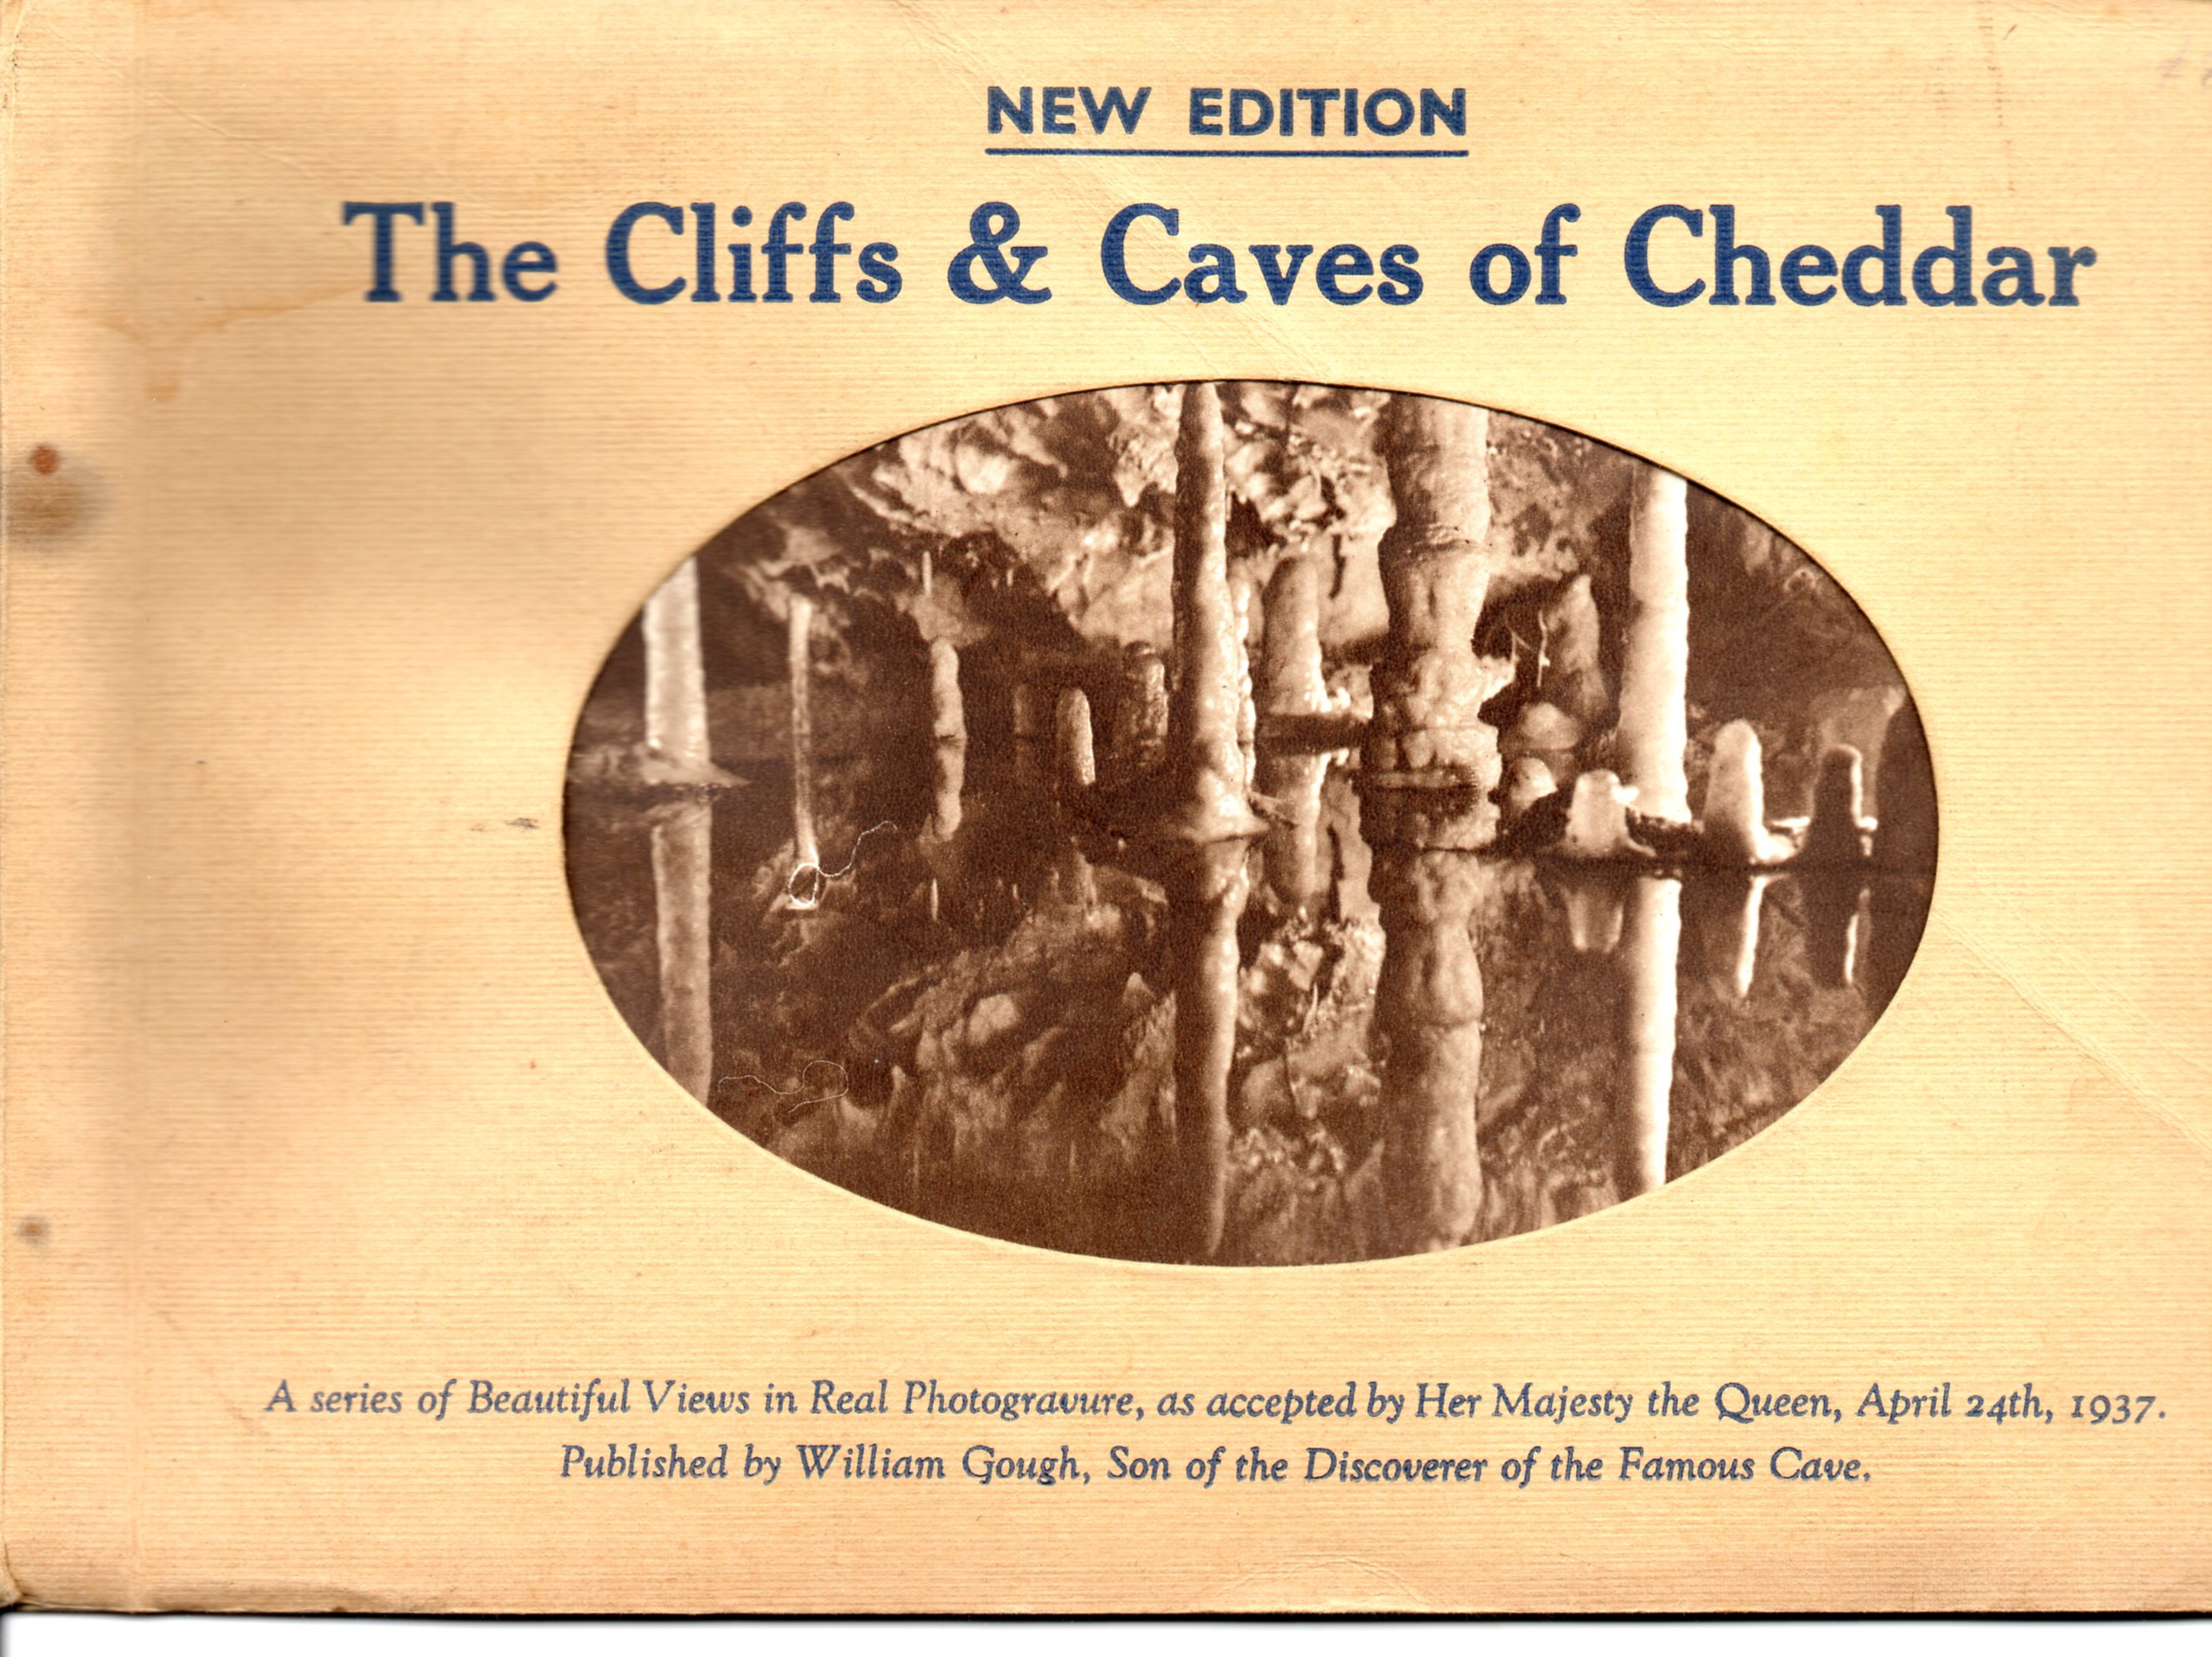 [USED] The Cliffs & Caves of Cheddar (New Edition)